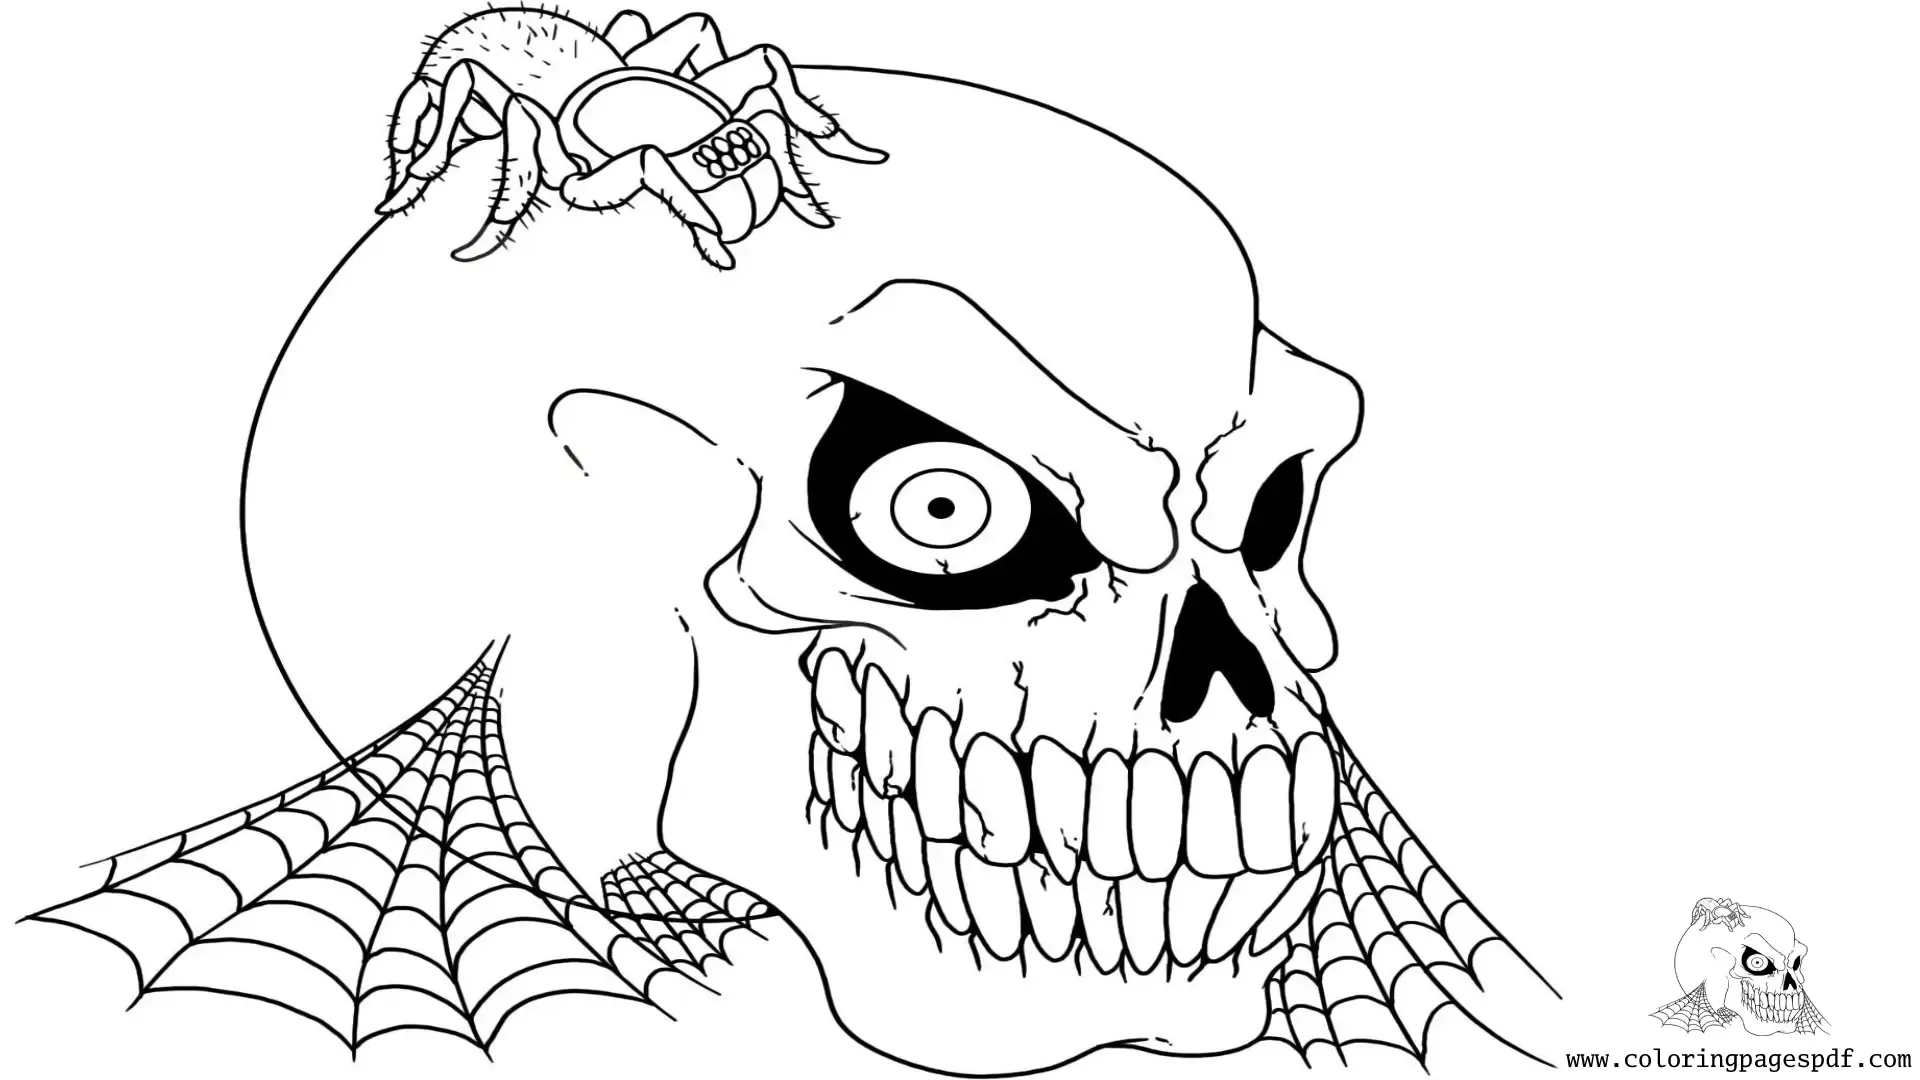 Coloring Page Of A Skull And A Spider